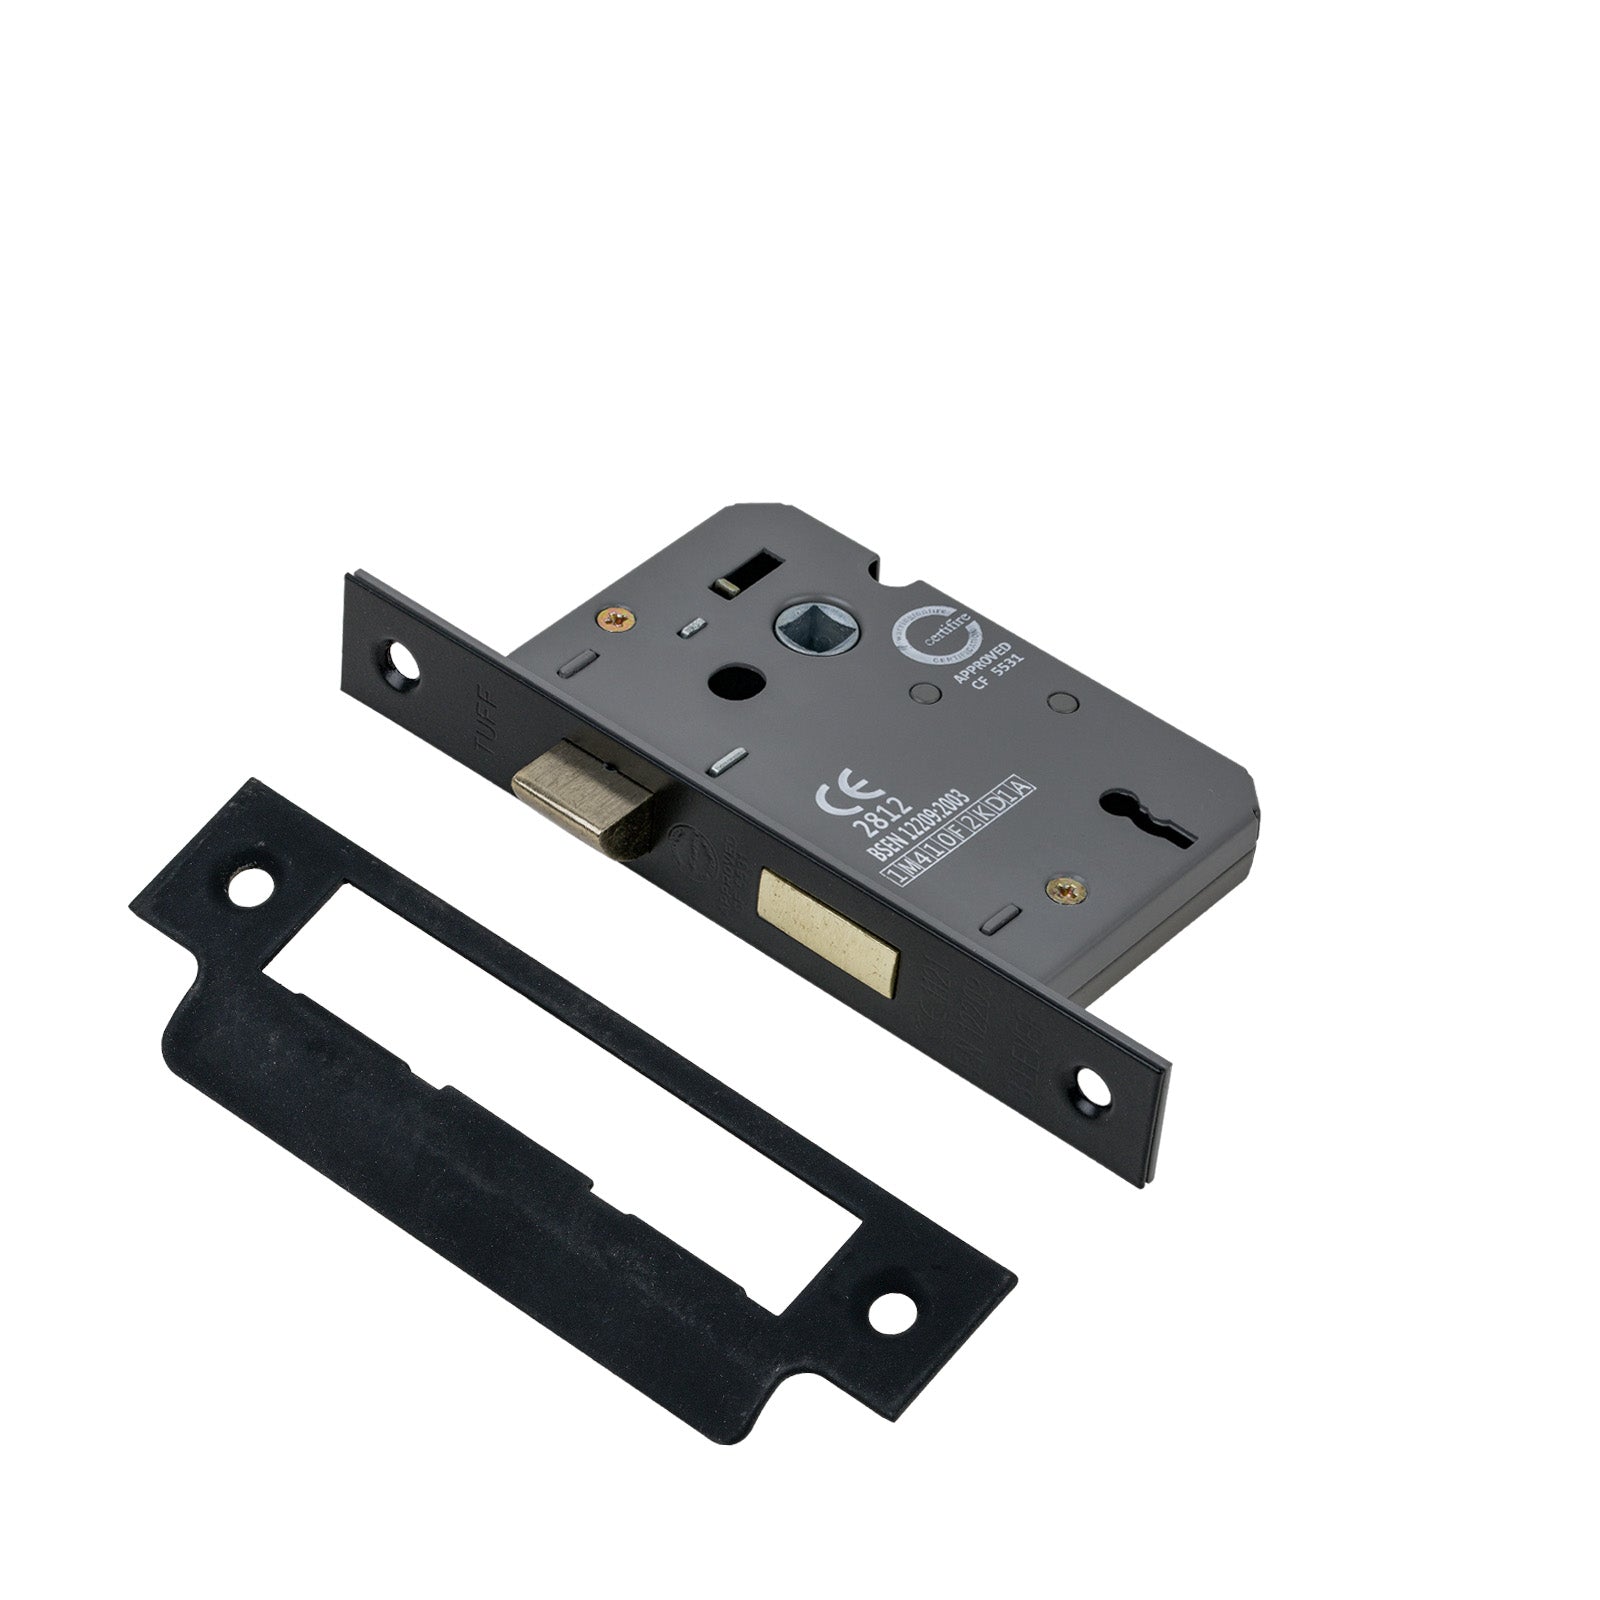 SHOW 3 Lever Sash Lock - 2.5 Inch with Matt Black finished forend and striker plate